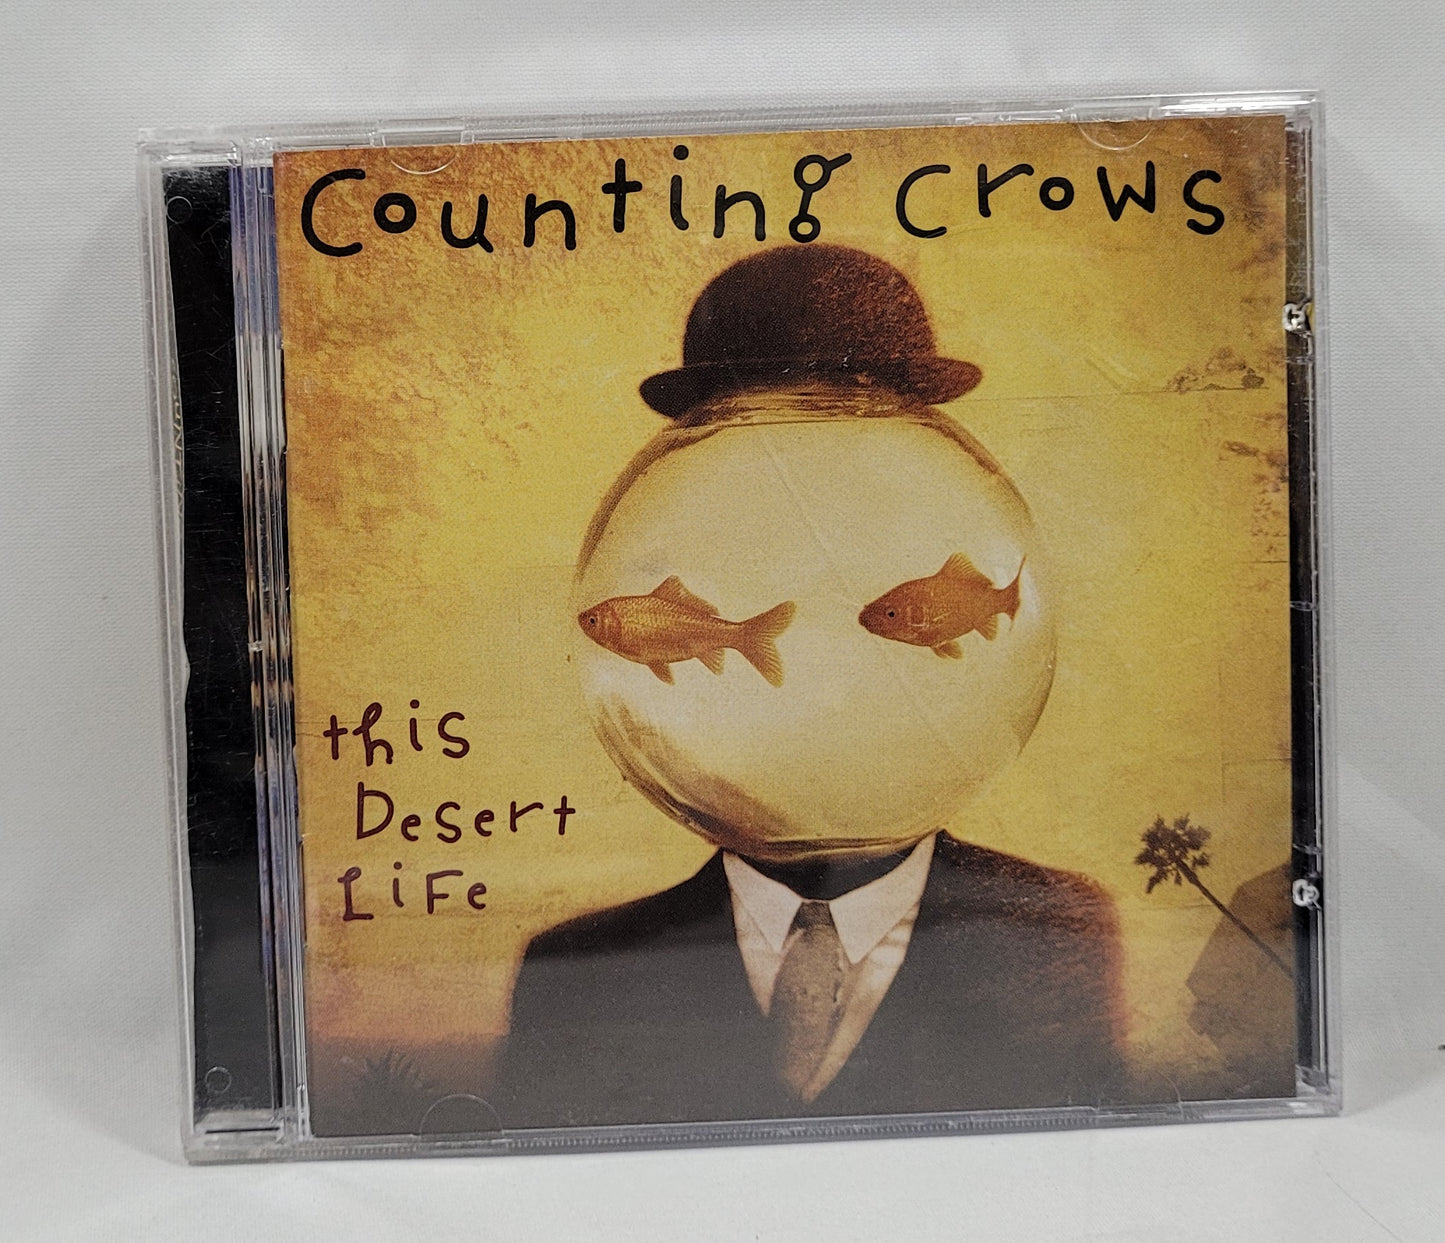 Counting Crows - This Desert Life [1999 PMDC] [Used CD]